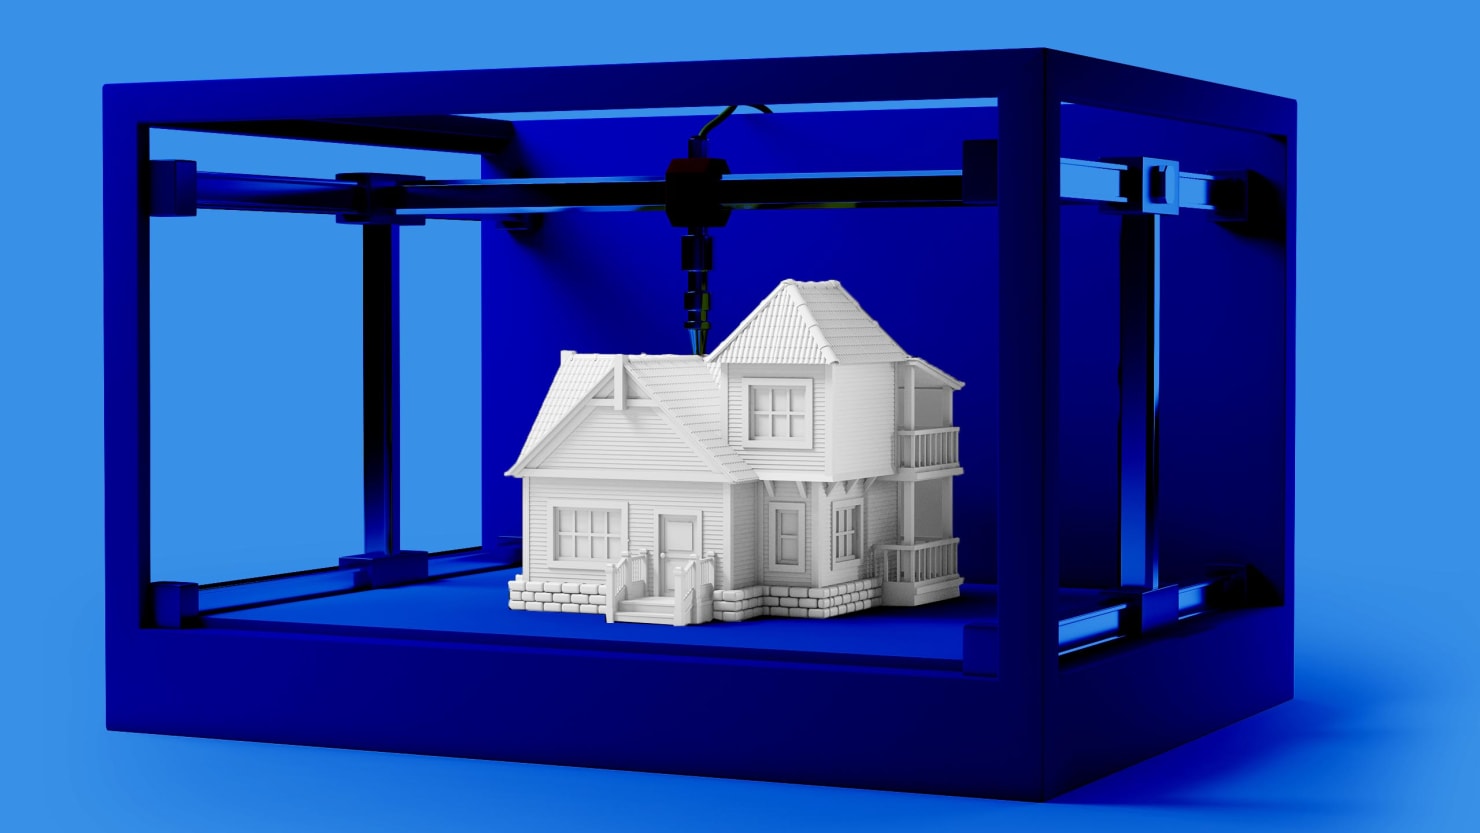 Can 3D Printed Homes Solve the Urban Housing Crisis?